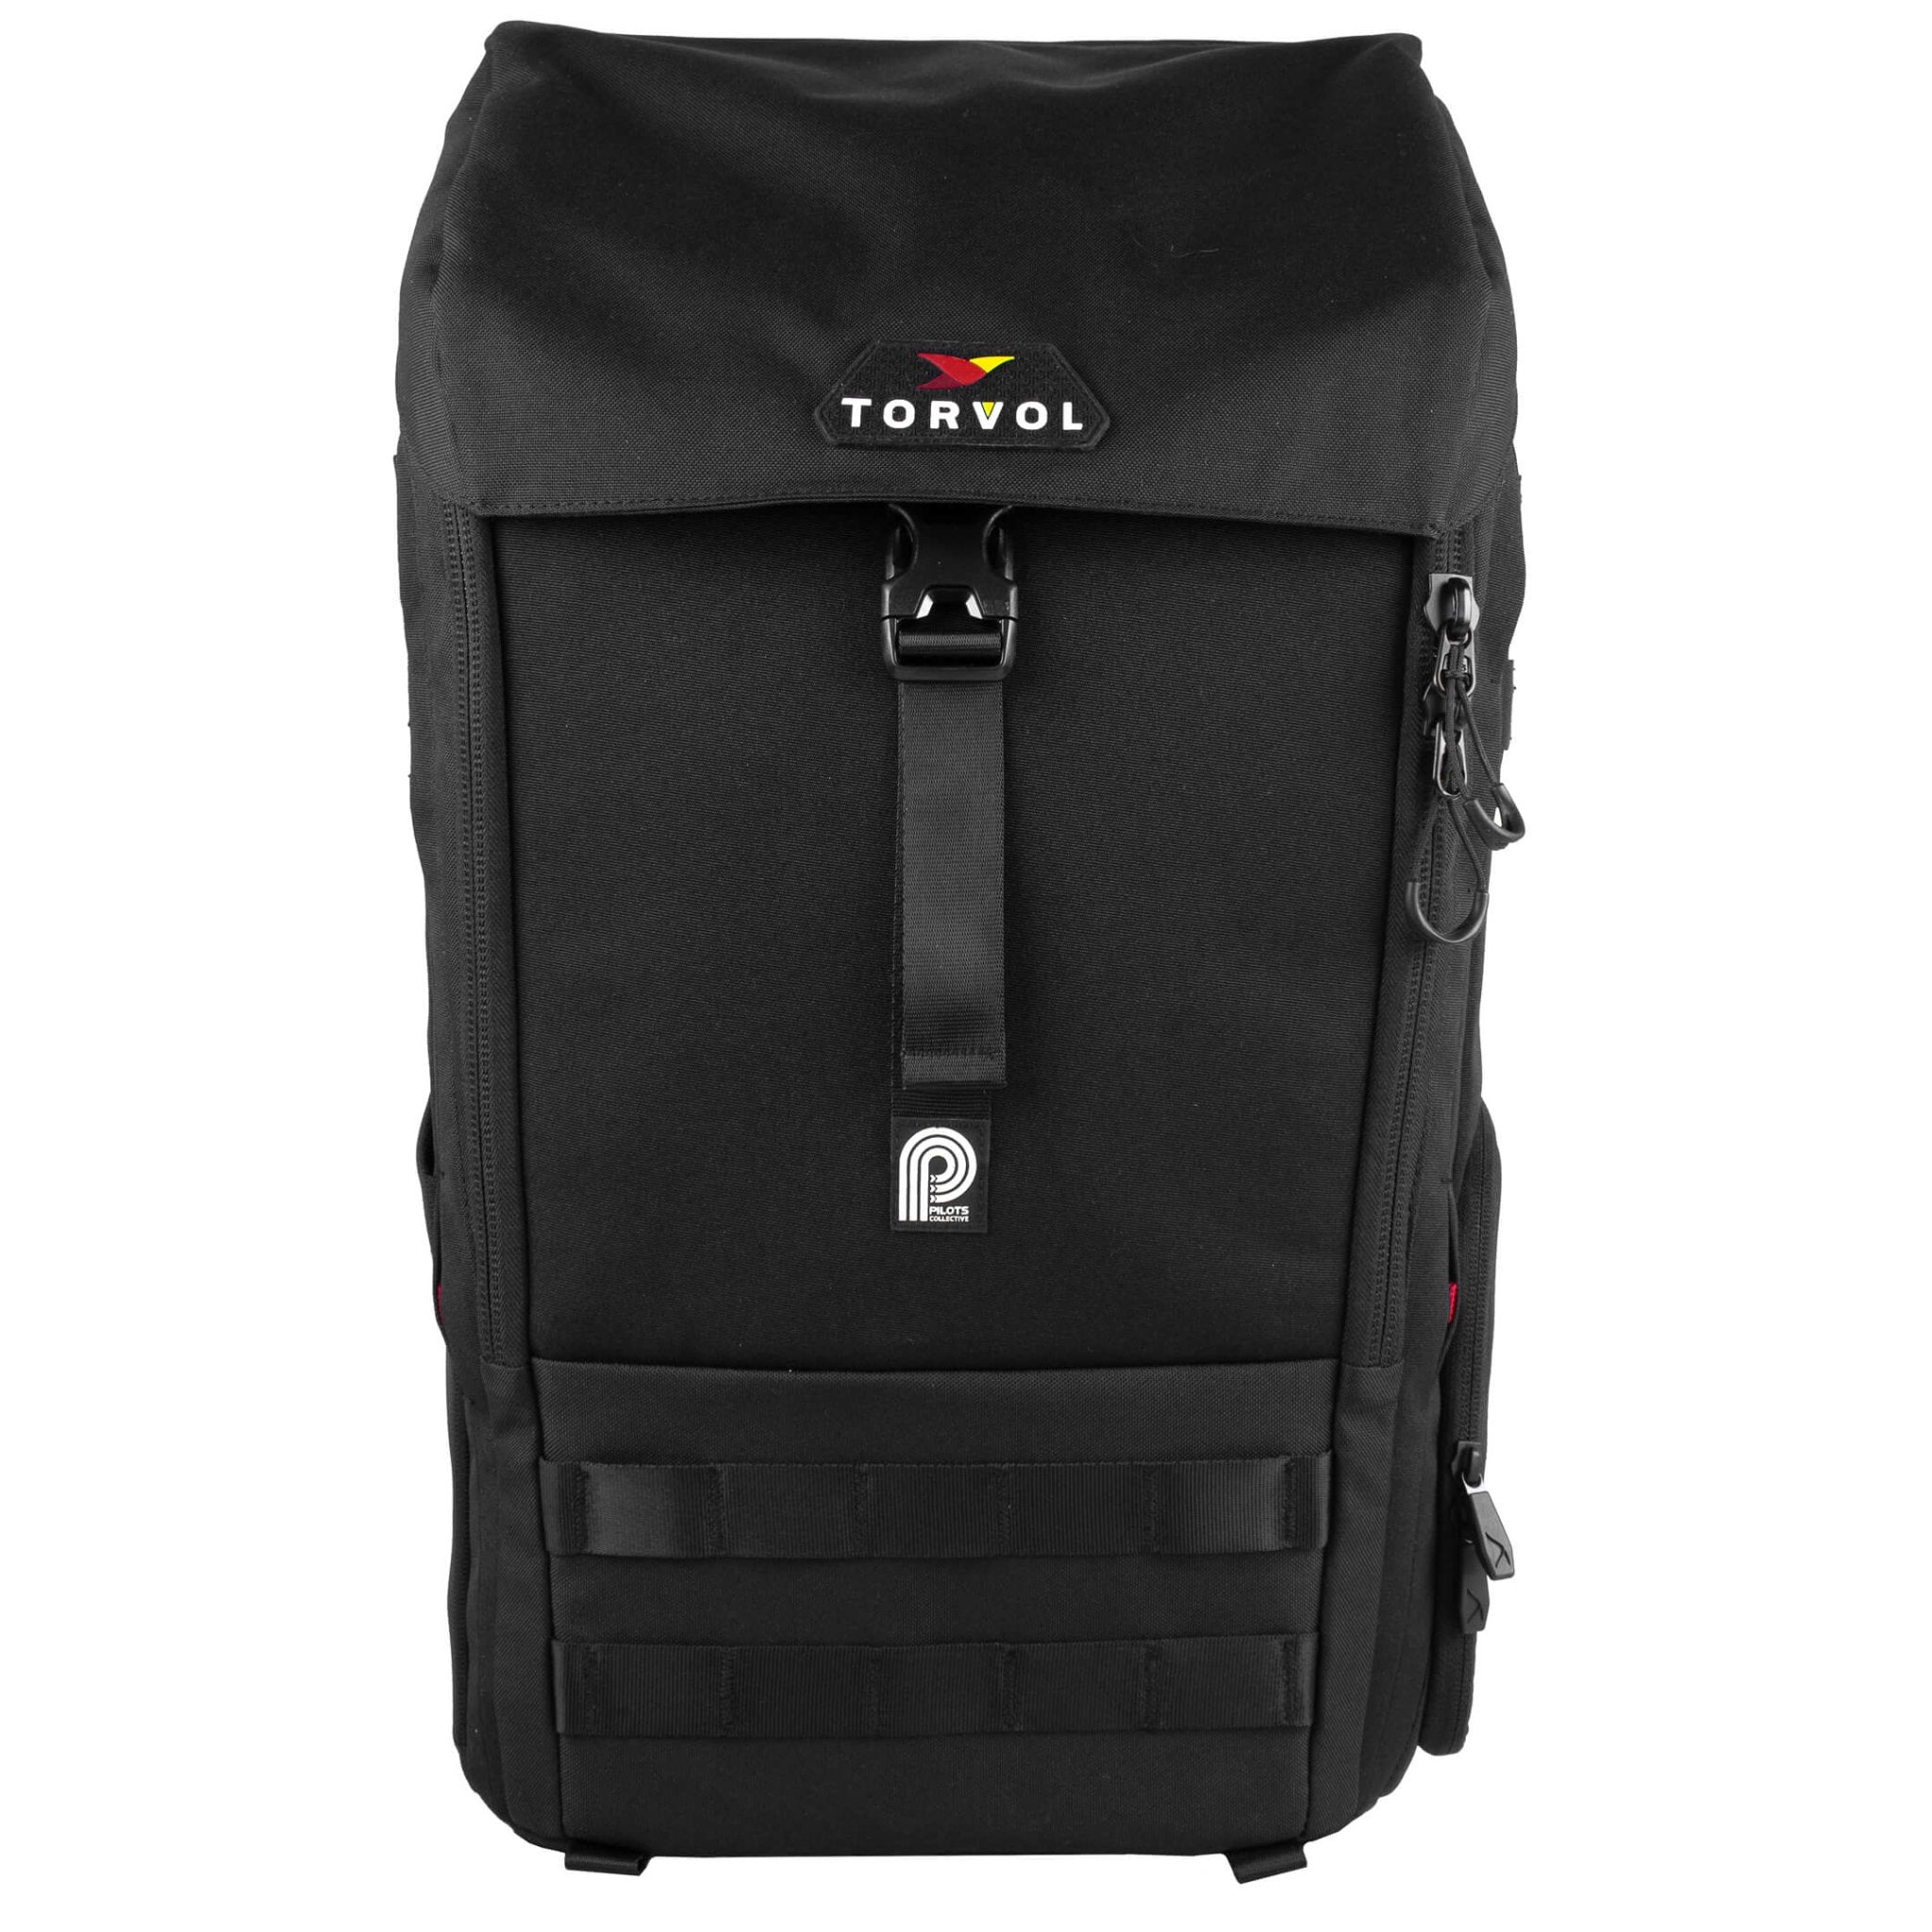 Torvol Urban Carrier Backpack - Your All-Round Freestyle Backpack 1 - Torvol - Drone Authority